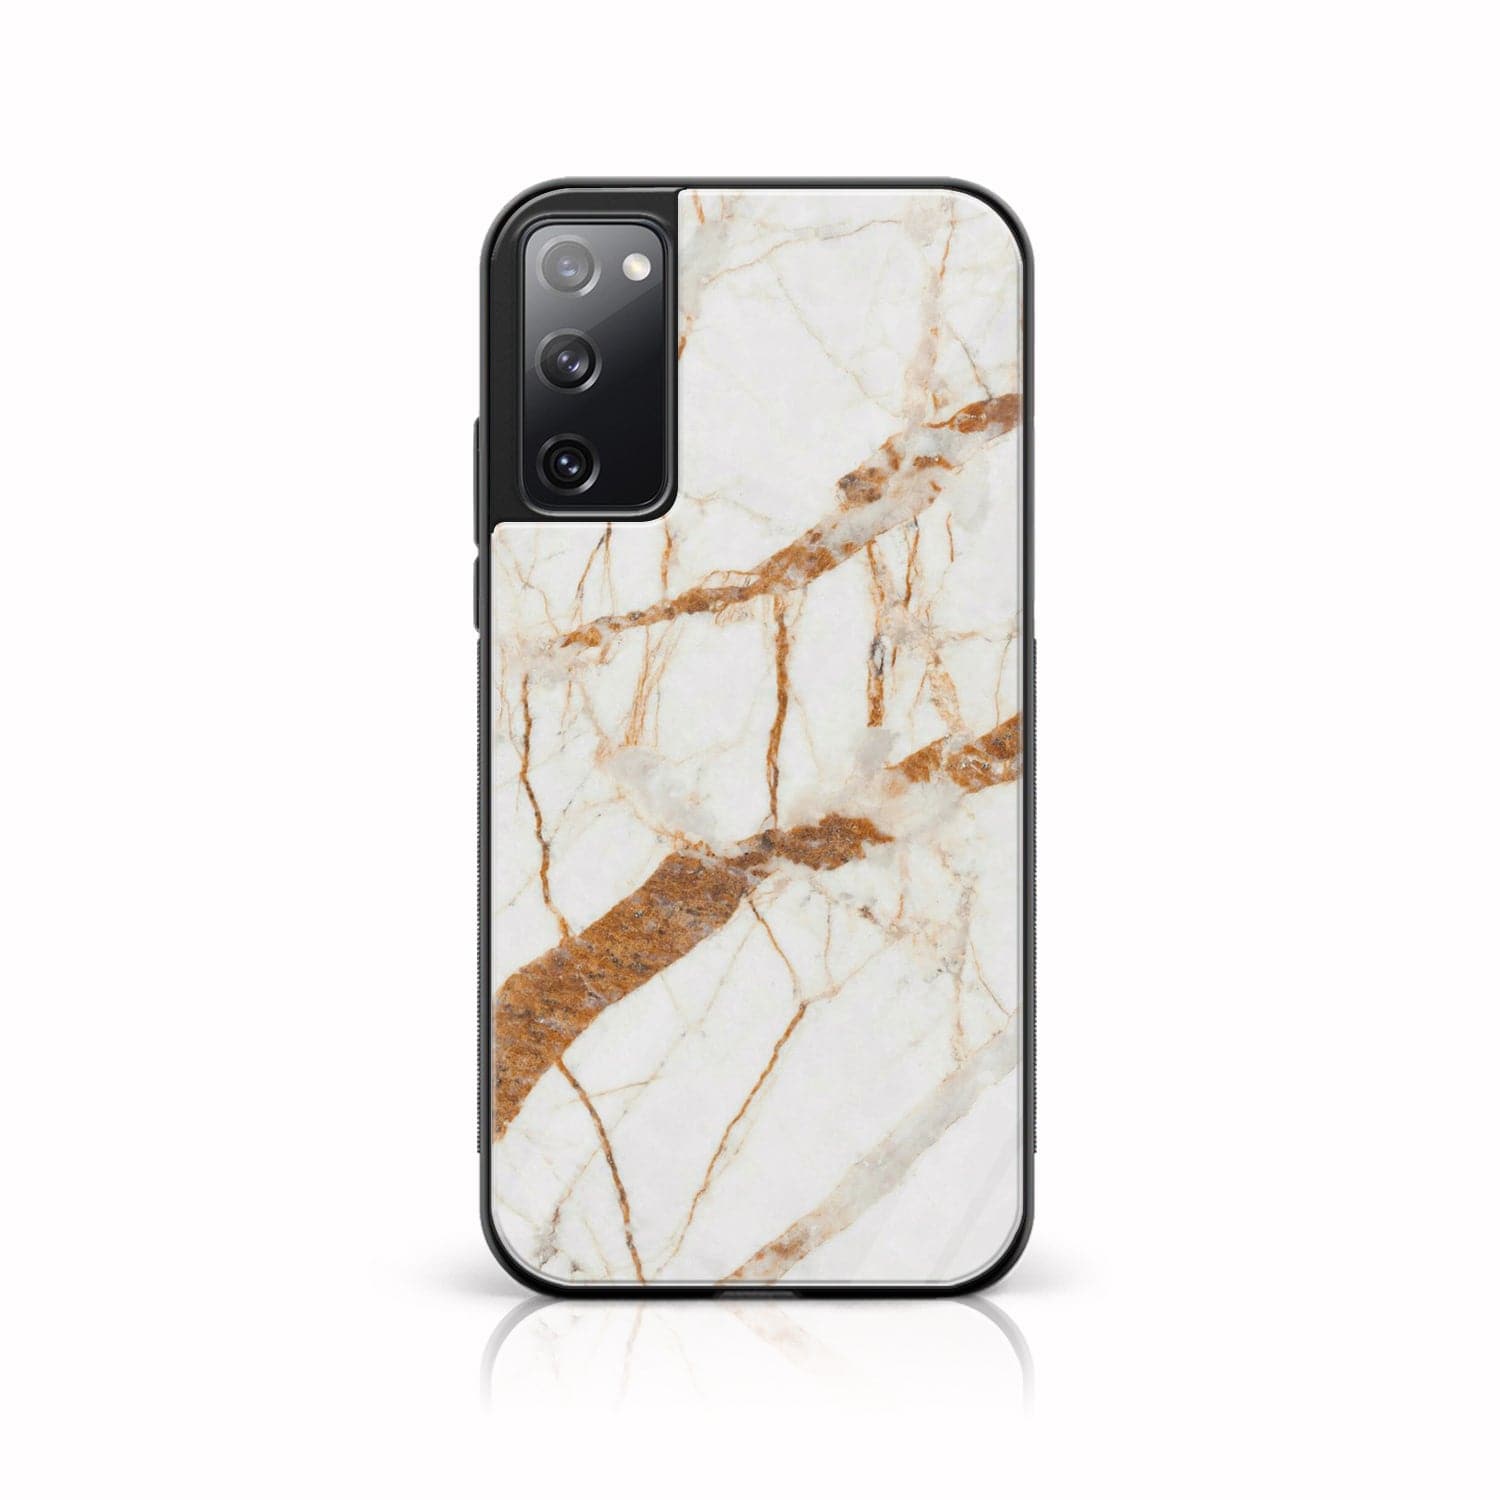 Galaxy S20 FE - White Marble Series - Premium Printed Glass soft Bumper shock Proof Case